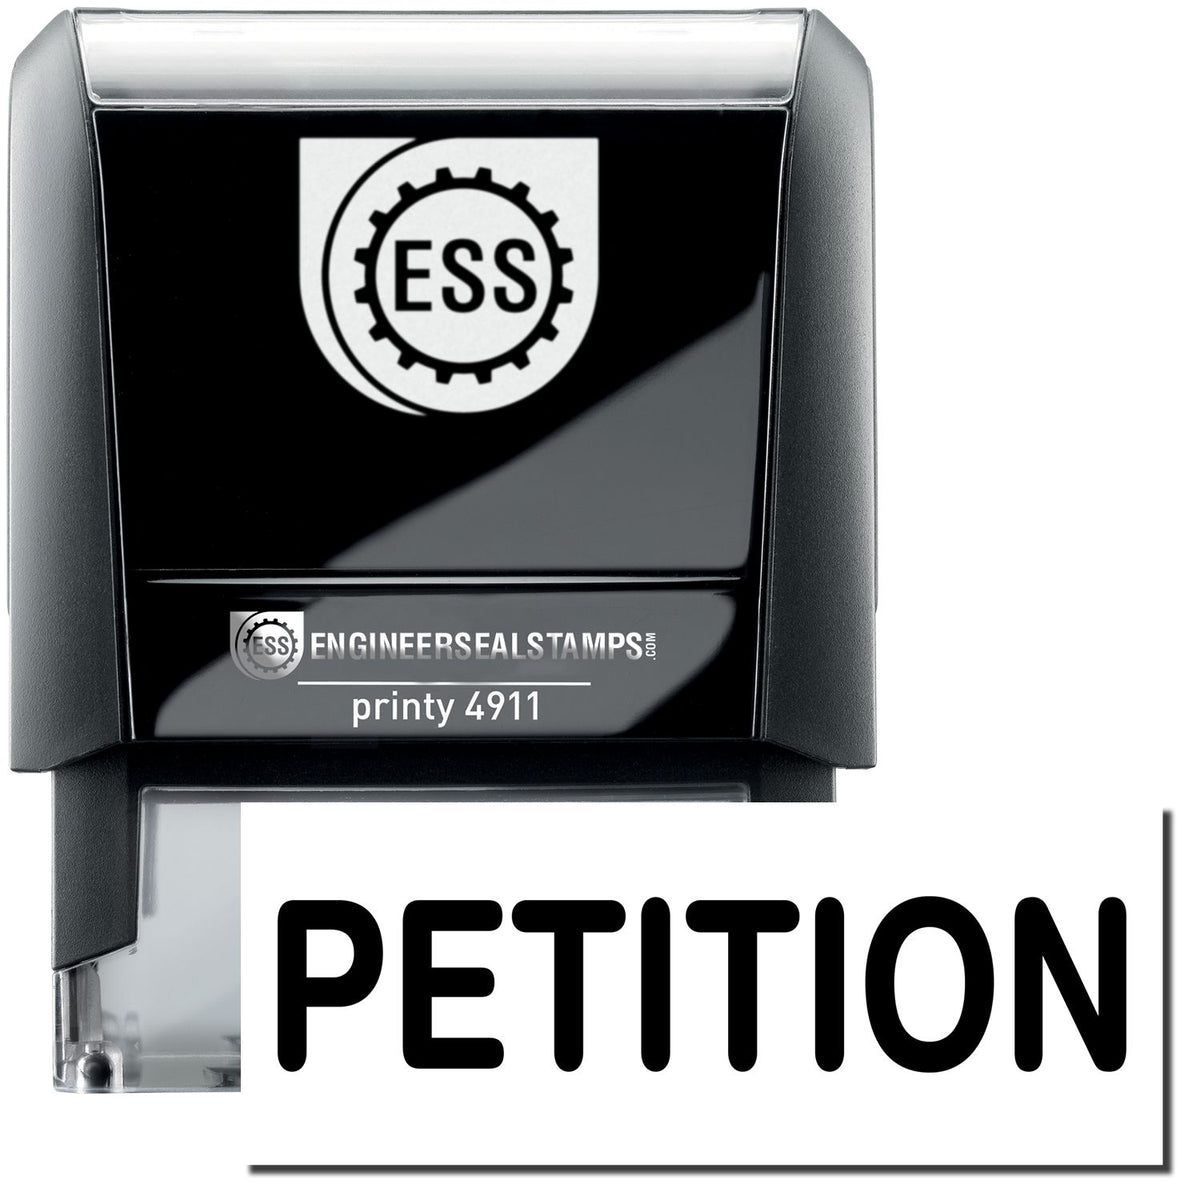 A self-inking stamp with a stamped image showing how the text &quot;PETITION&quot; is displayed after stamping.